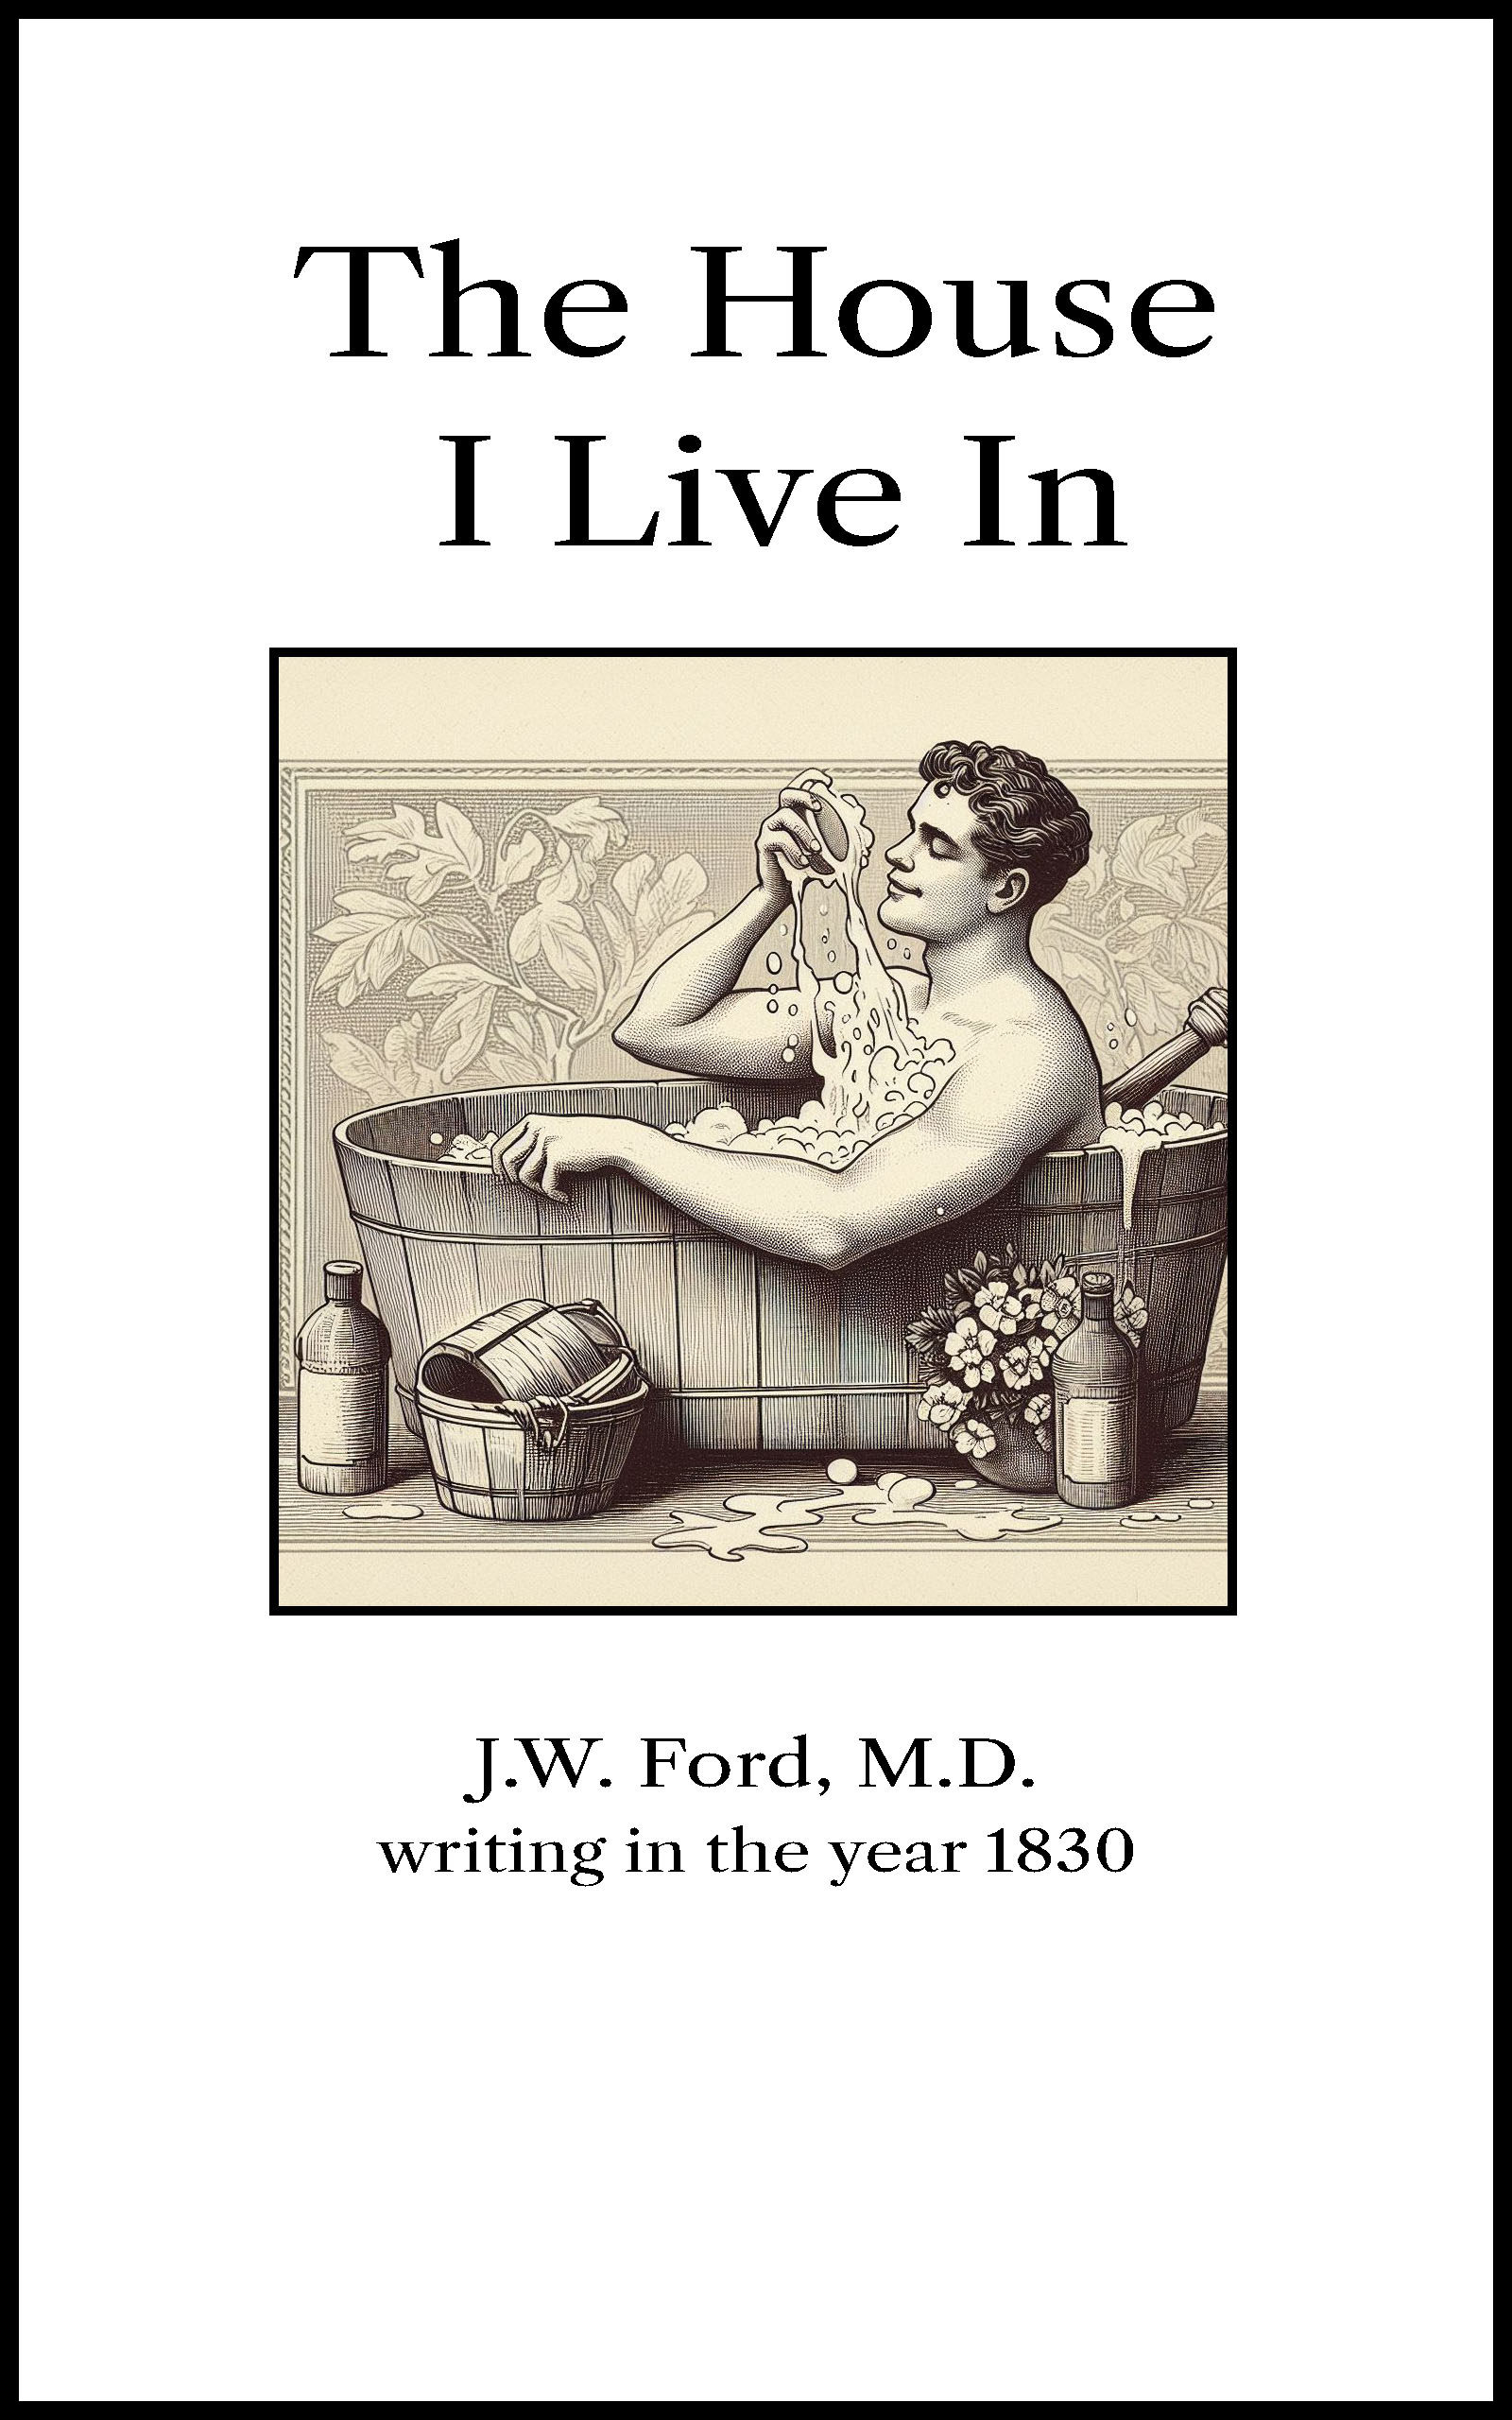 The House I Live In, by J.W. Ford, M.D.